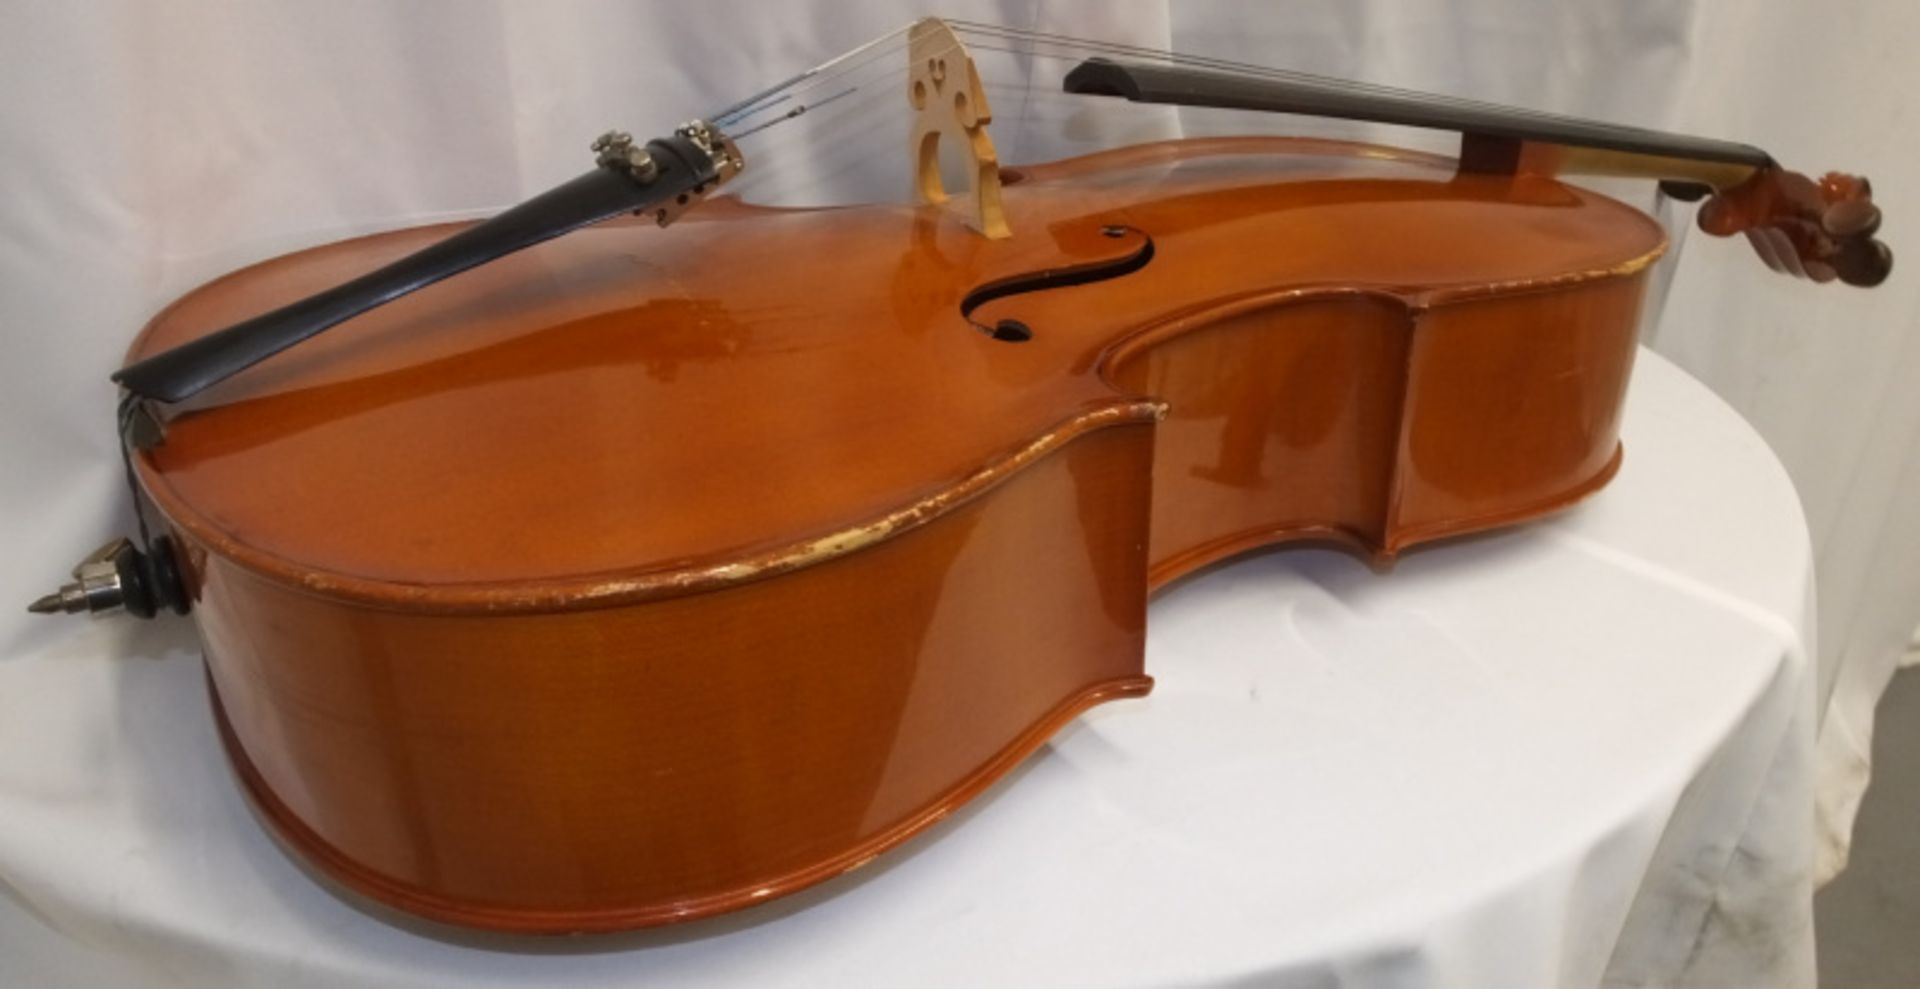 Cello in carry case (unbranded) - Please check photos carefully for damaged or missing components - Image 11 of 21